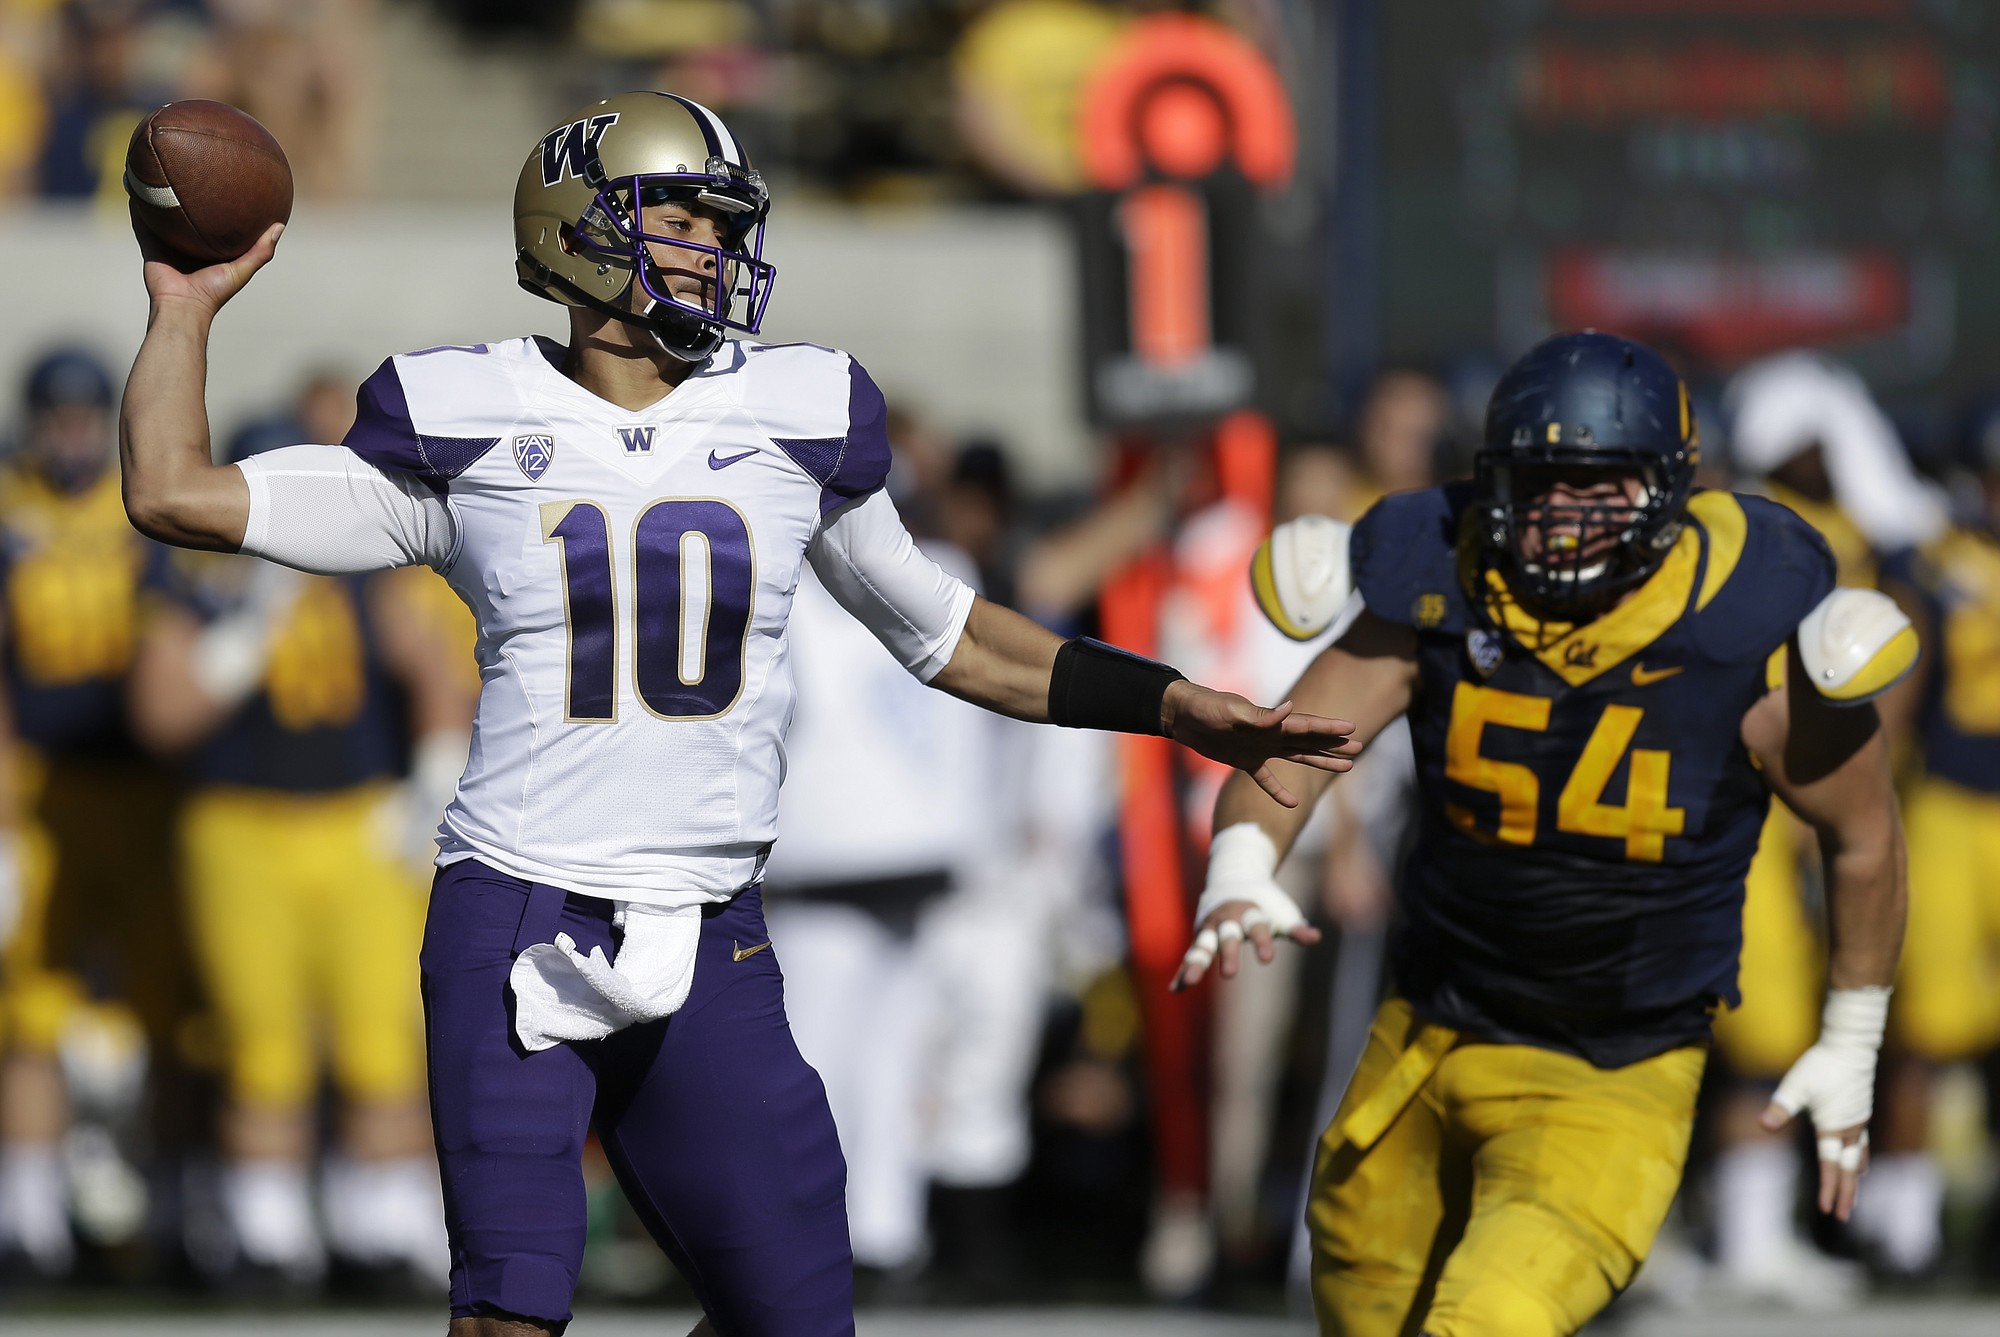 Washington quarterback Cyler Miles, left, passes under pressure from California's Austin Clark during the first half of an NCAA college football game Saturday, Oct. 11, 2014, in Berkeley, Calif.